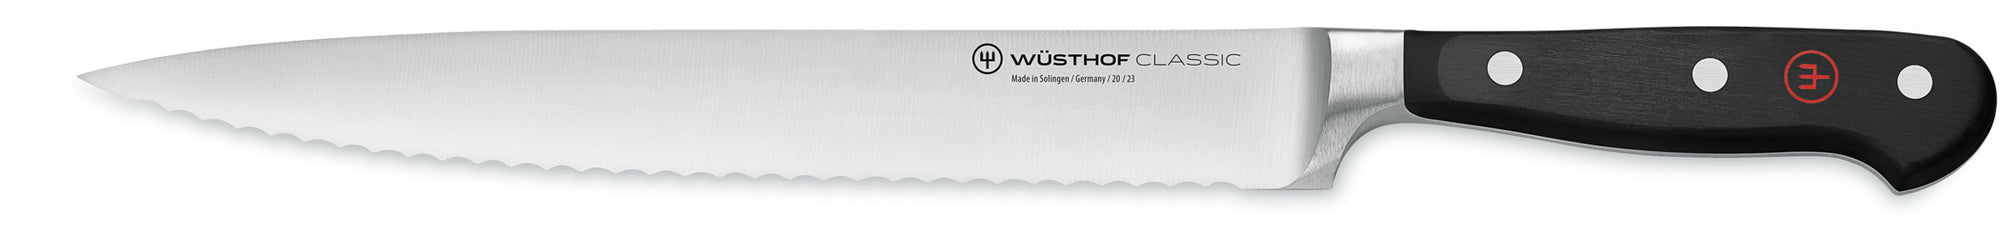 Wusthof Classic Serrated Slicer Carving Knife Canada 23cm 4523-23 1040100923